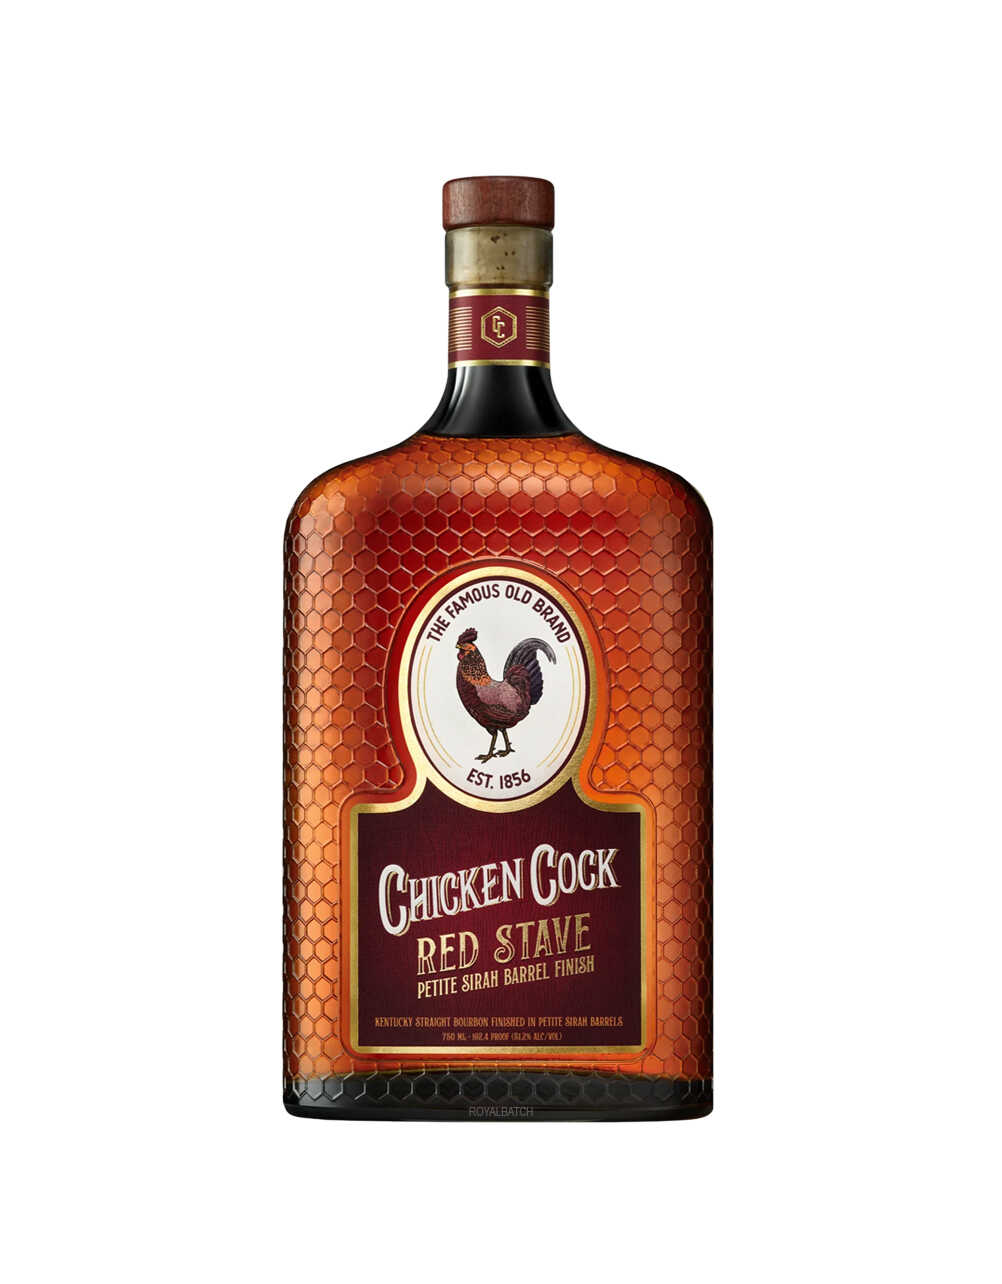 Chicken Cock Red Stave Petite Sirah Barrel Finish Bourbon Whiskey